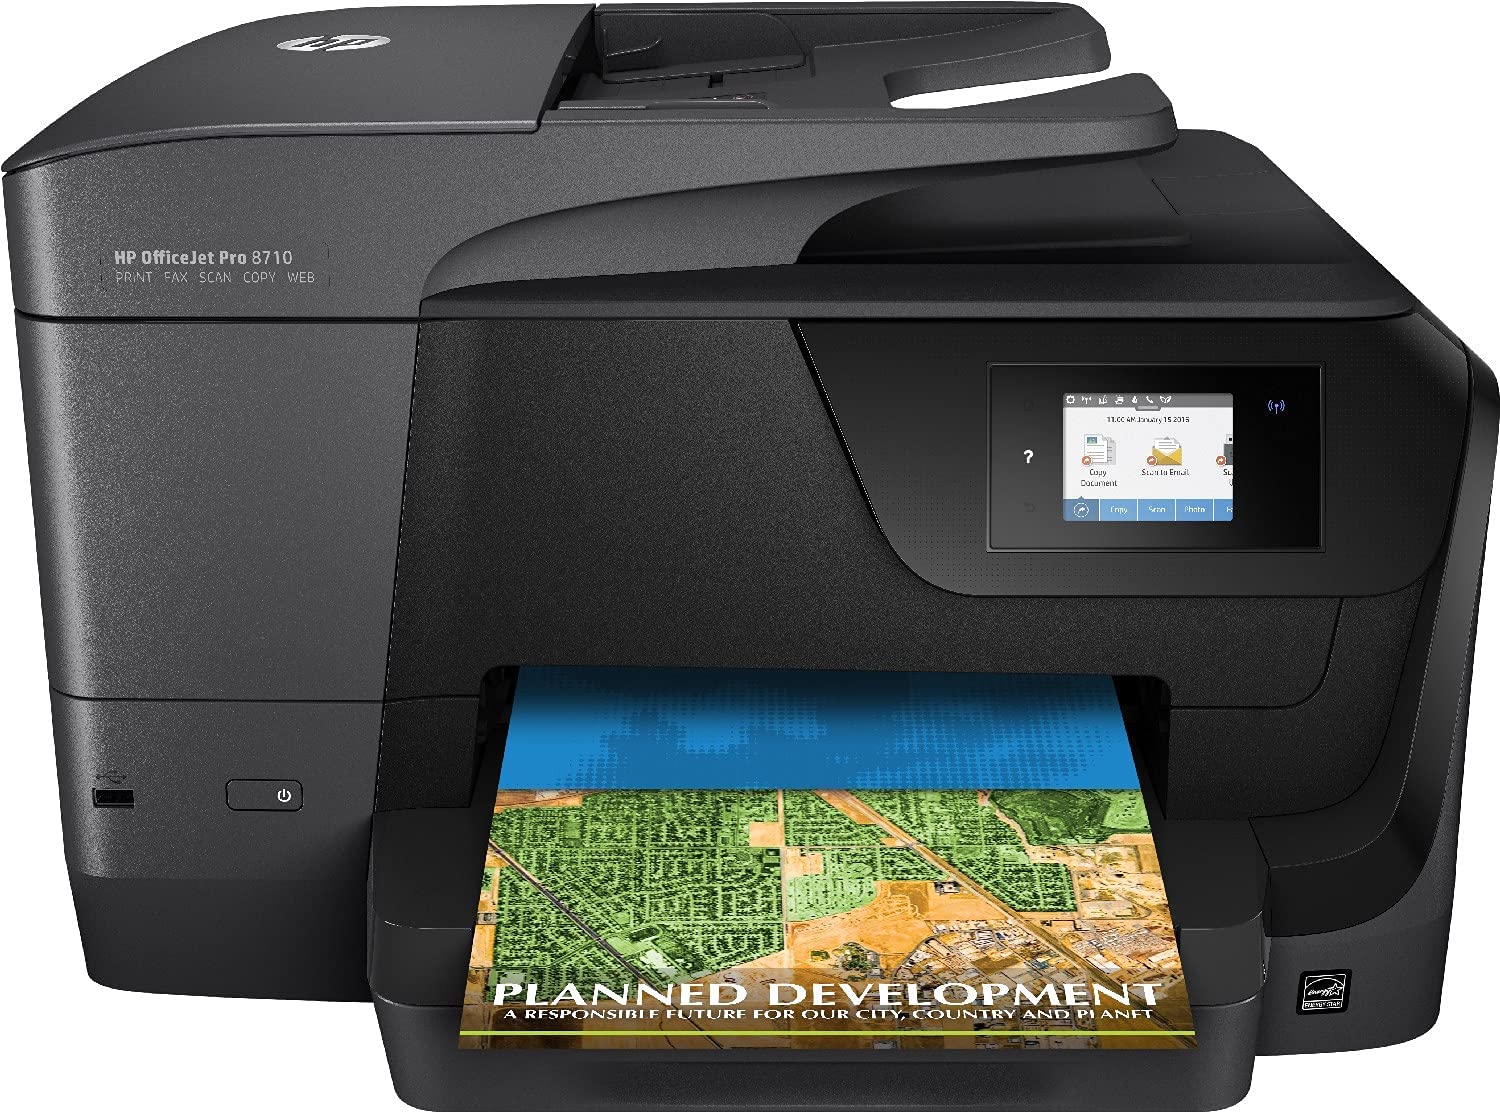 How to Install HP OfficeJet Pro 8710/8715/8720 Linux Mint LTS - Featured